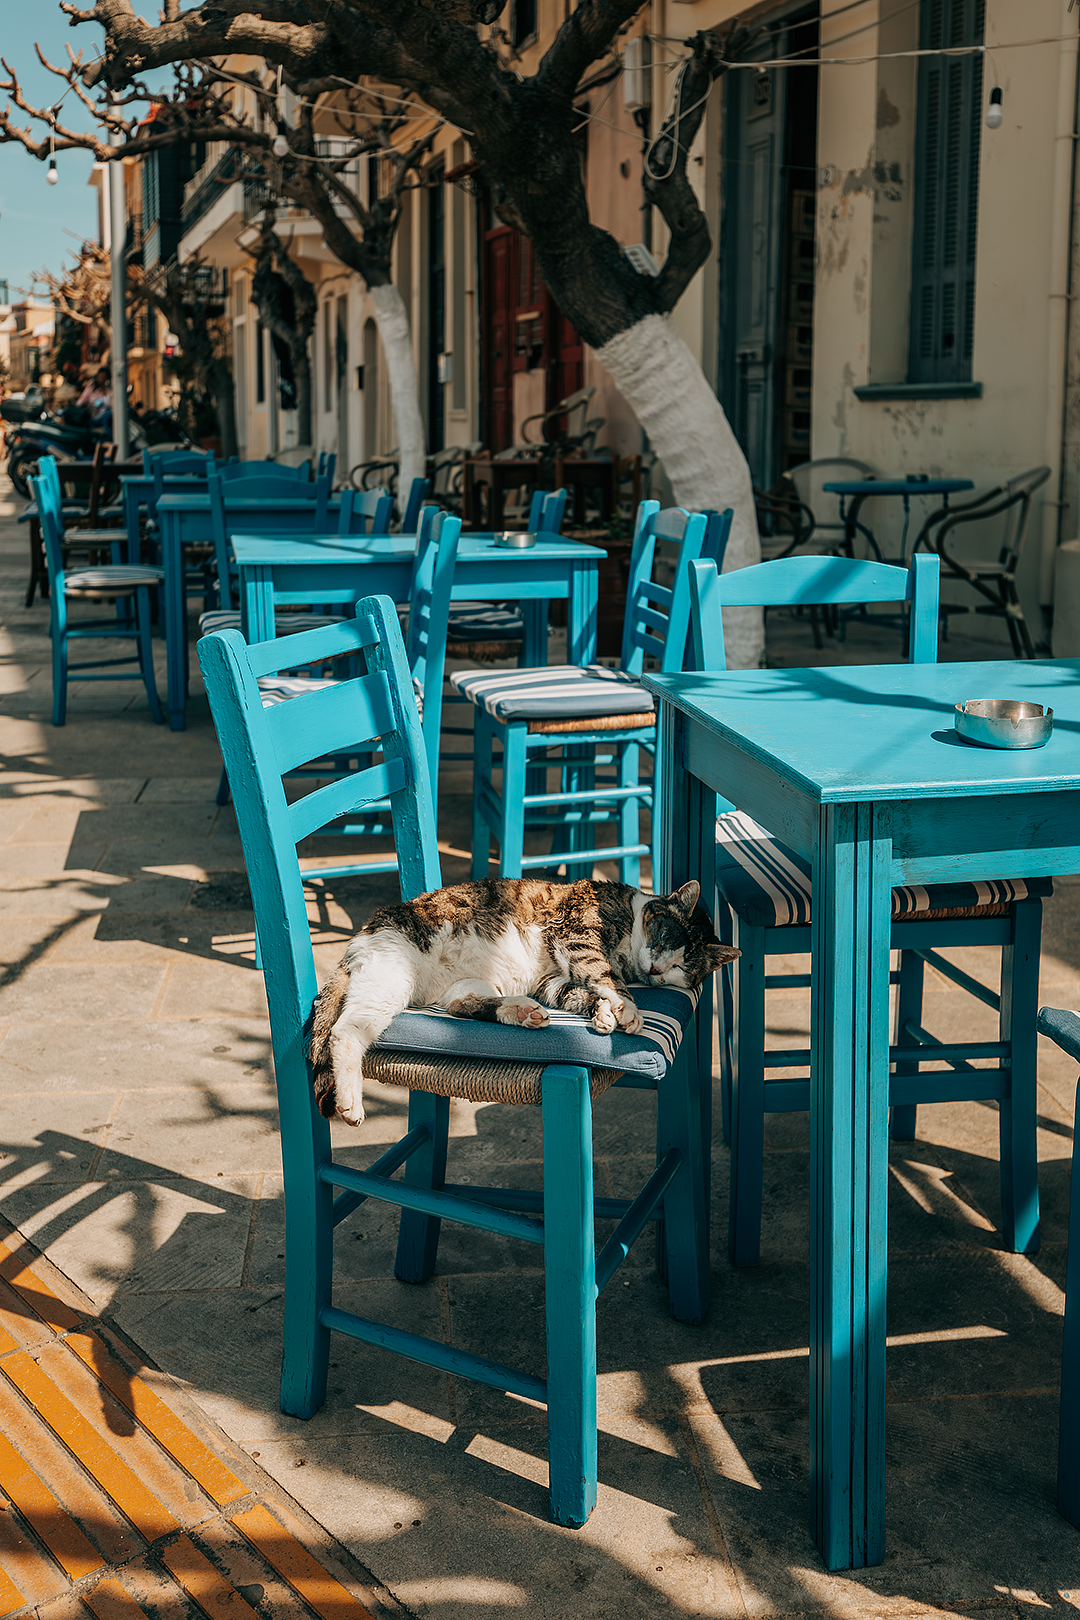 Rethymno Old Town